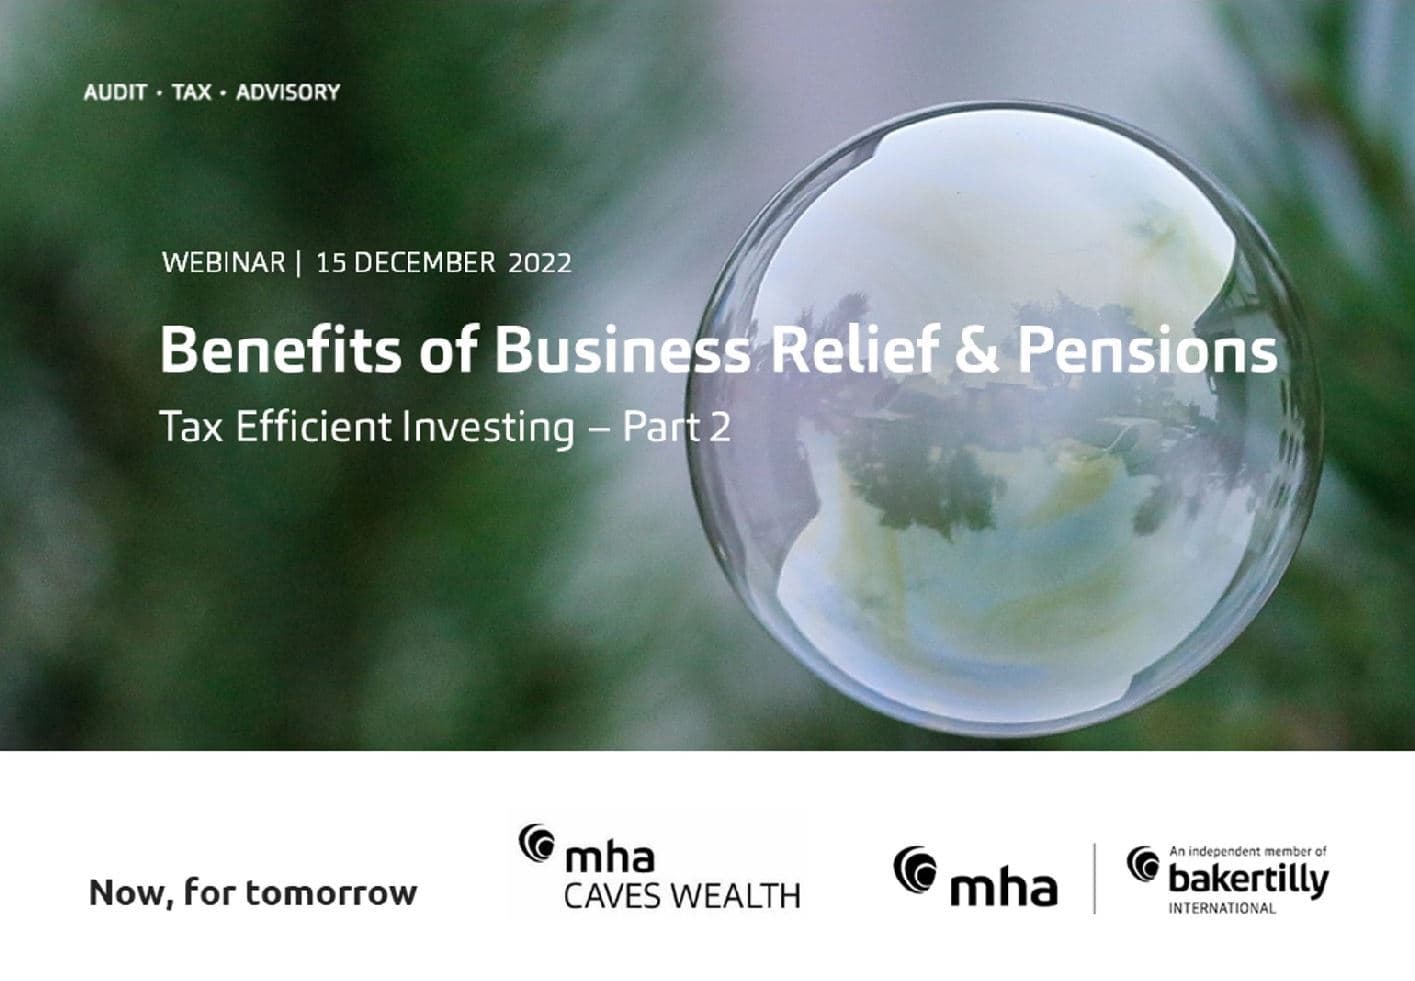 PCEB Webinar – Tax Efficient Investing Part 2 - Benefits of Business Relief & Pensions